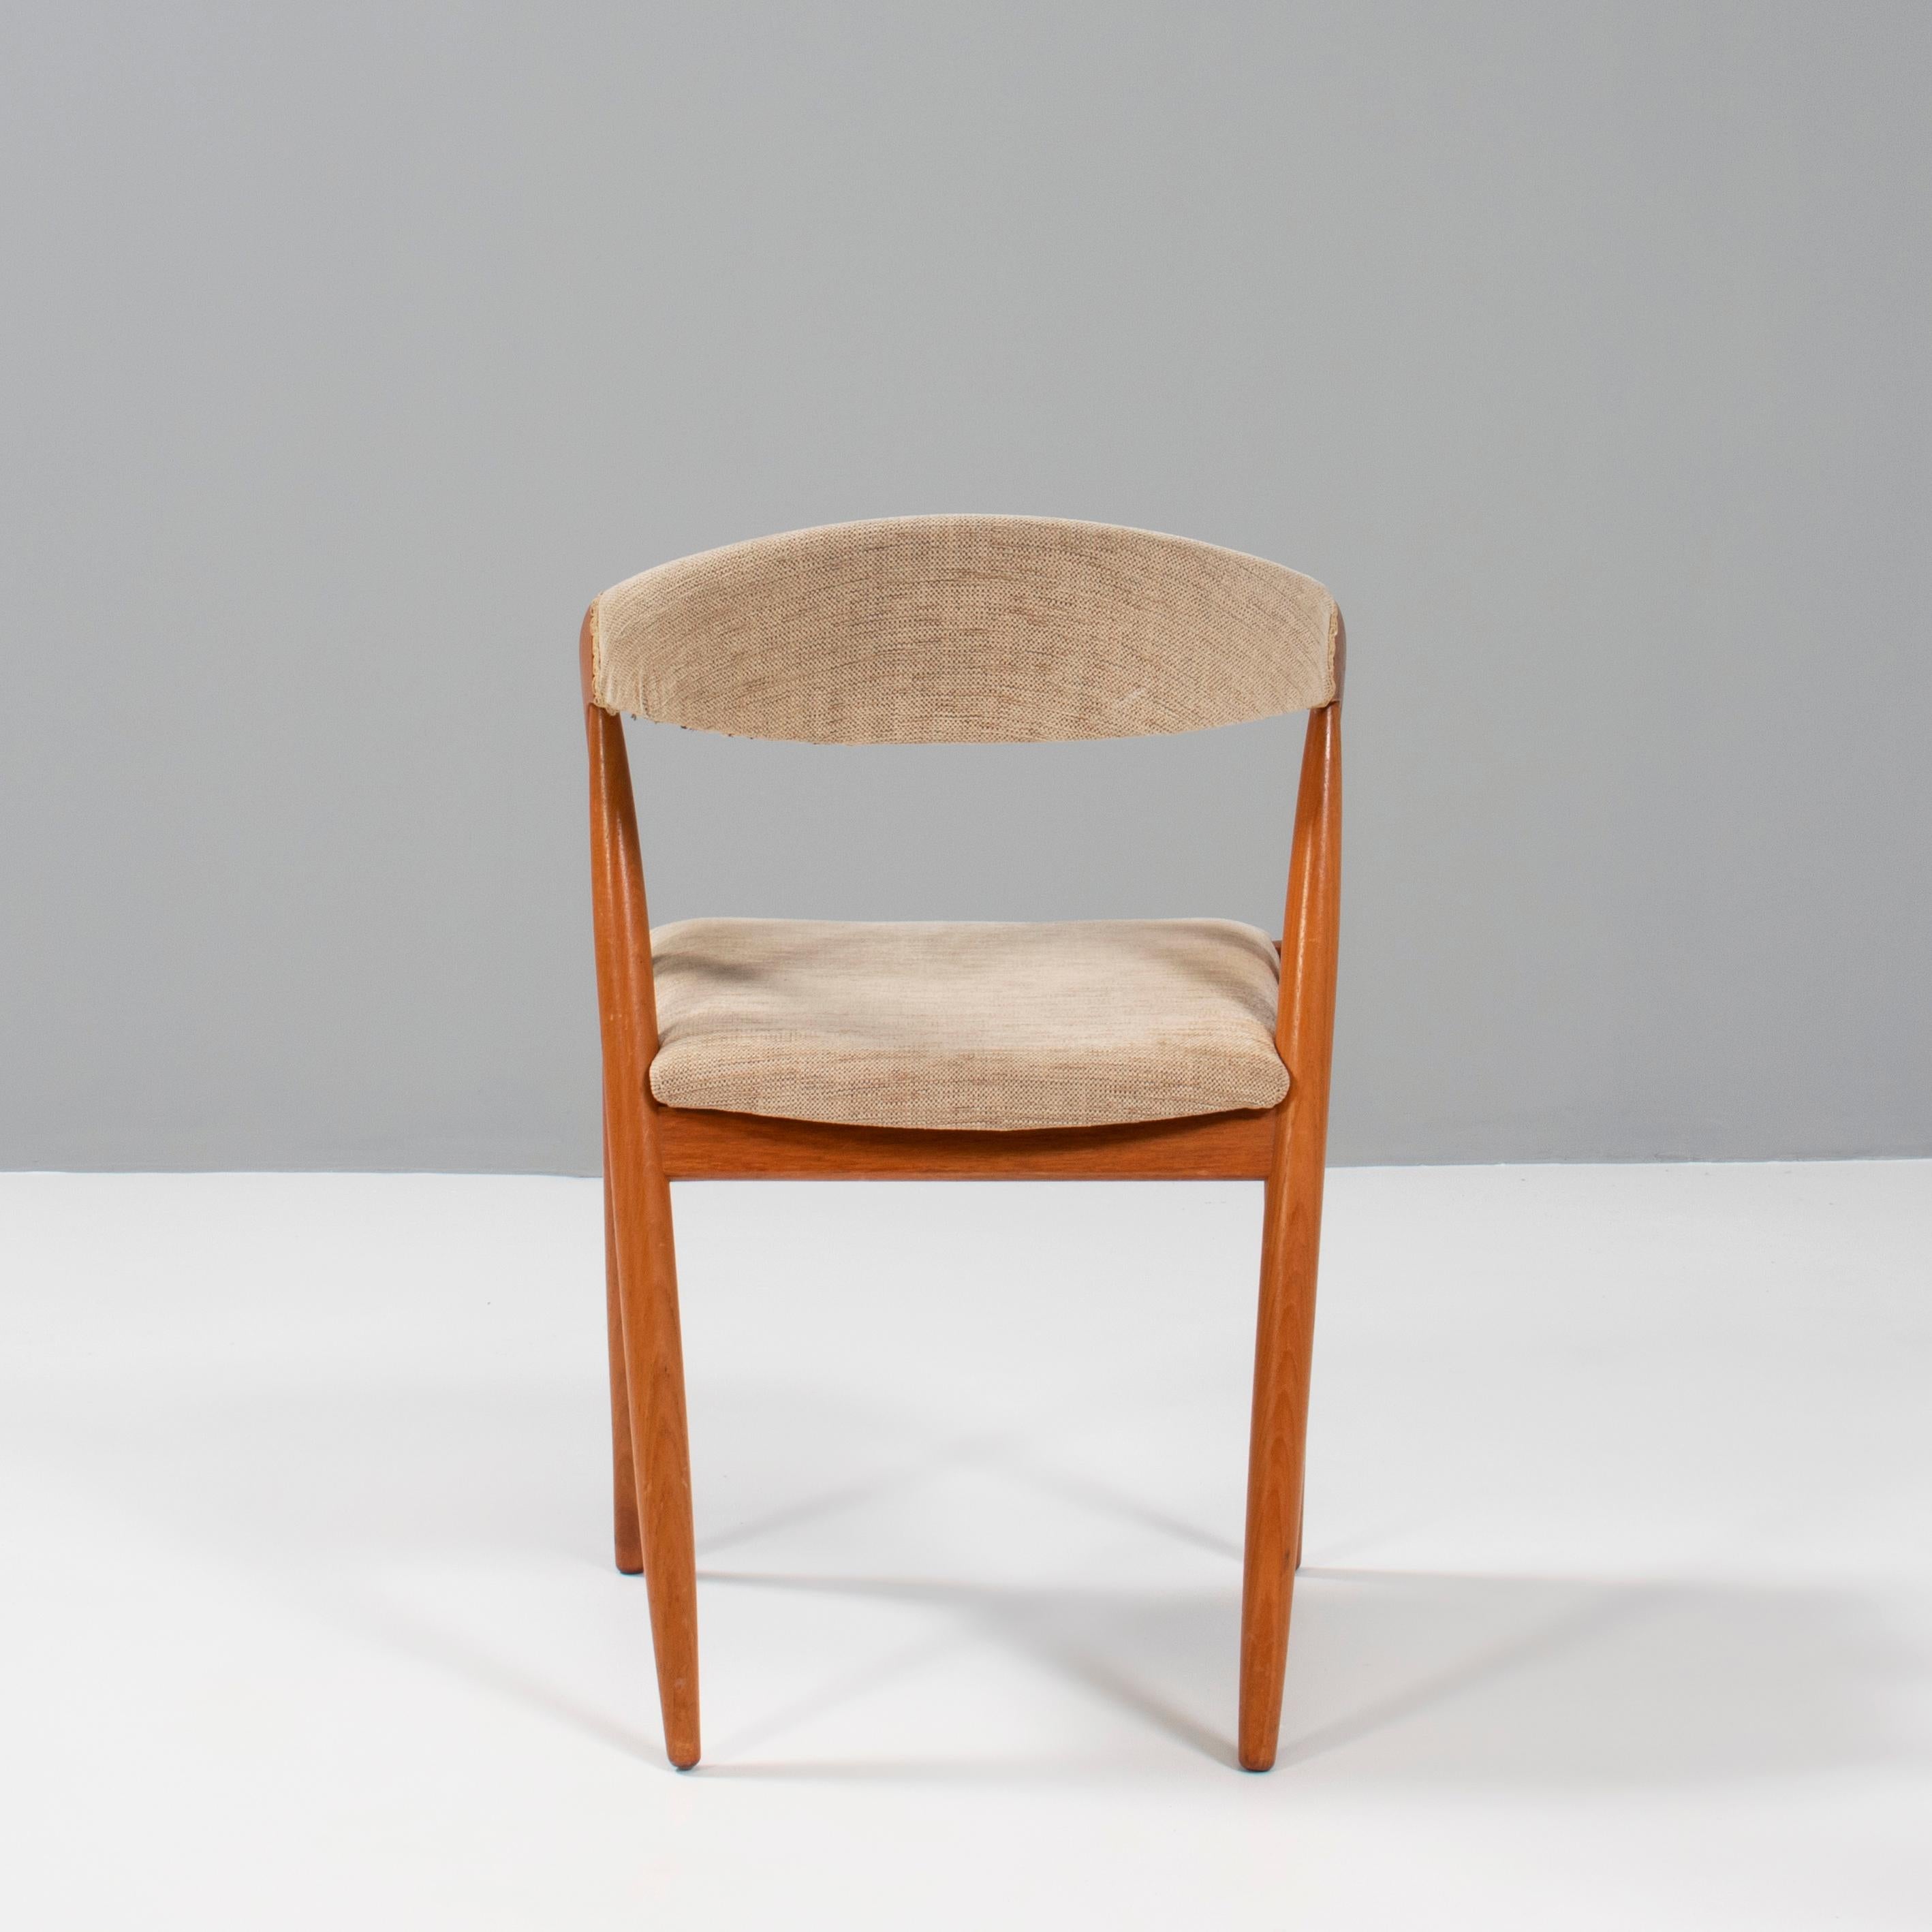 Designed by Kai Kristiansen for Schou Andersen the Model 31 dining chair is a fantastic example of classic Danish Mid-Century design.

Constructed from teak, the chair has a classic silhouette combining a curved backrest with angled legs and arm